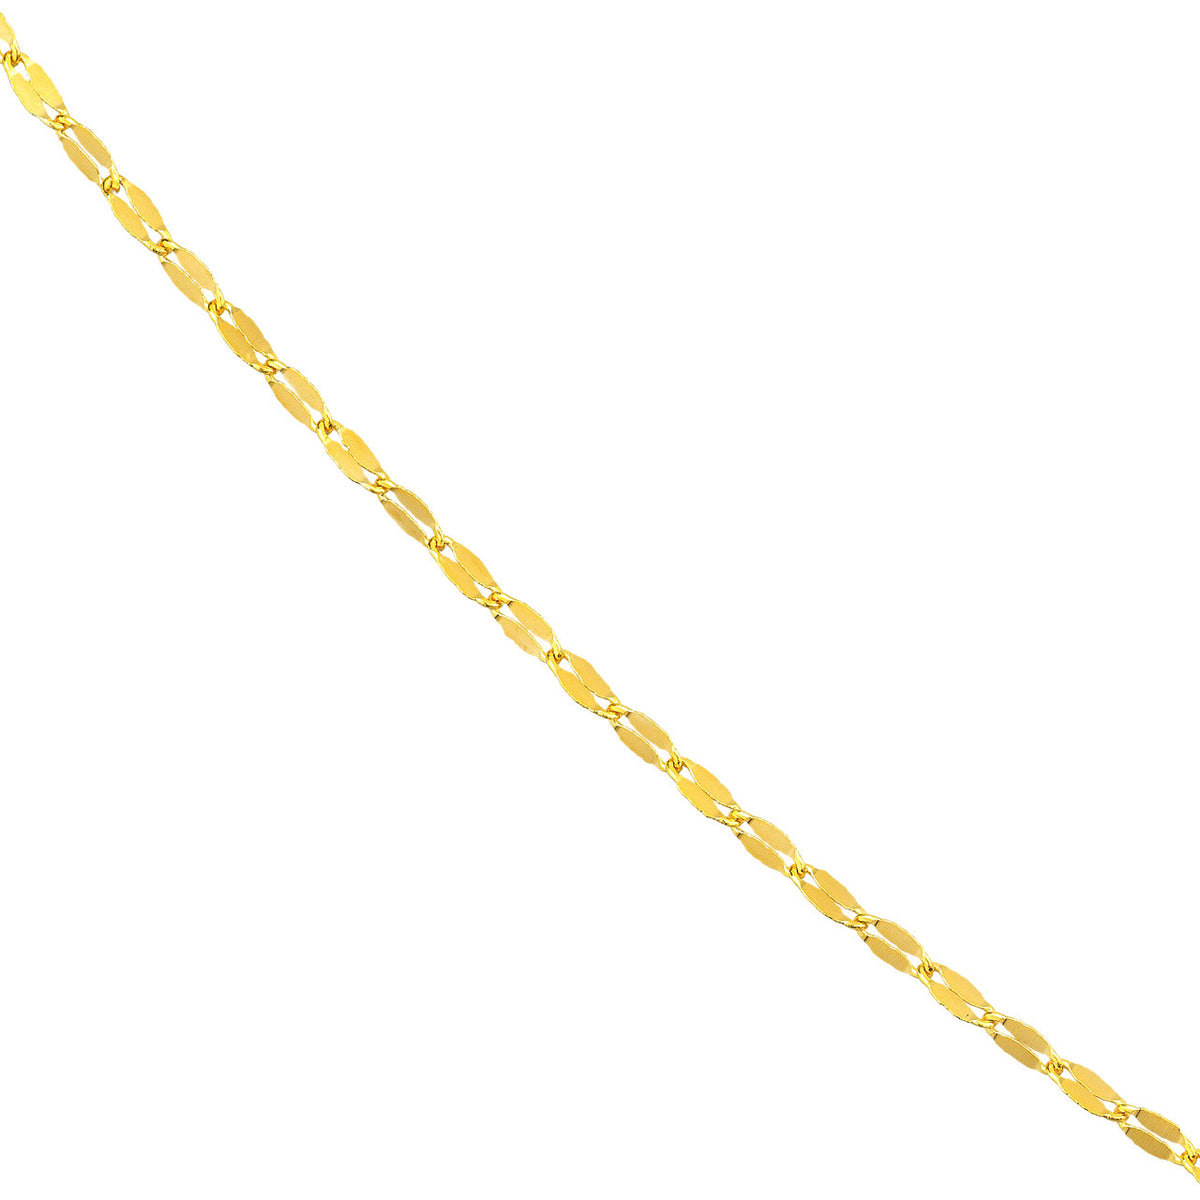 14K Yellow Gold or White Gold 1.45mm Hammered Forzentina Chain Necklace with Spring Ring